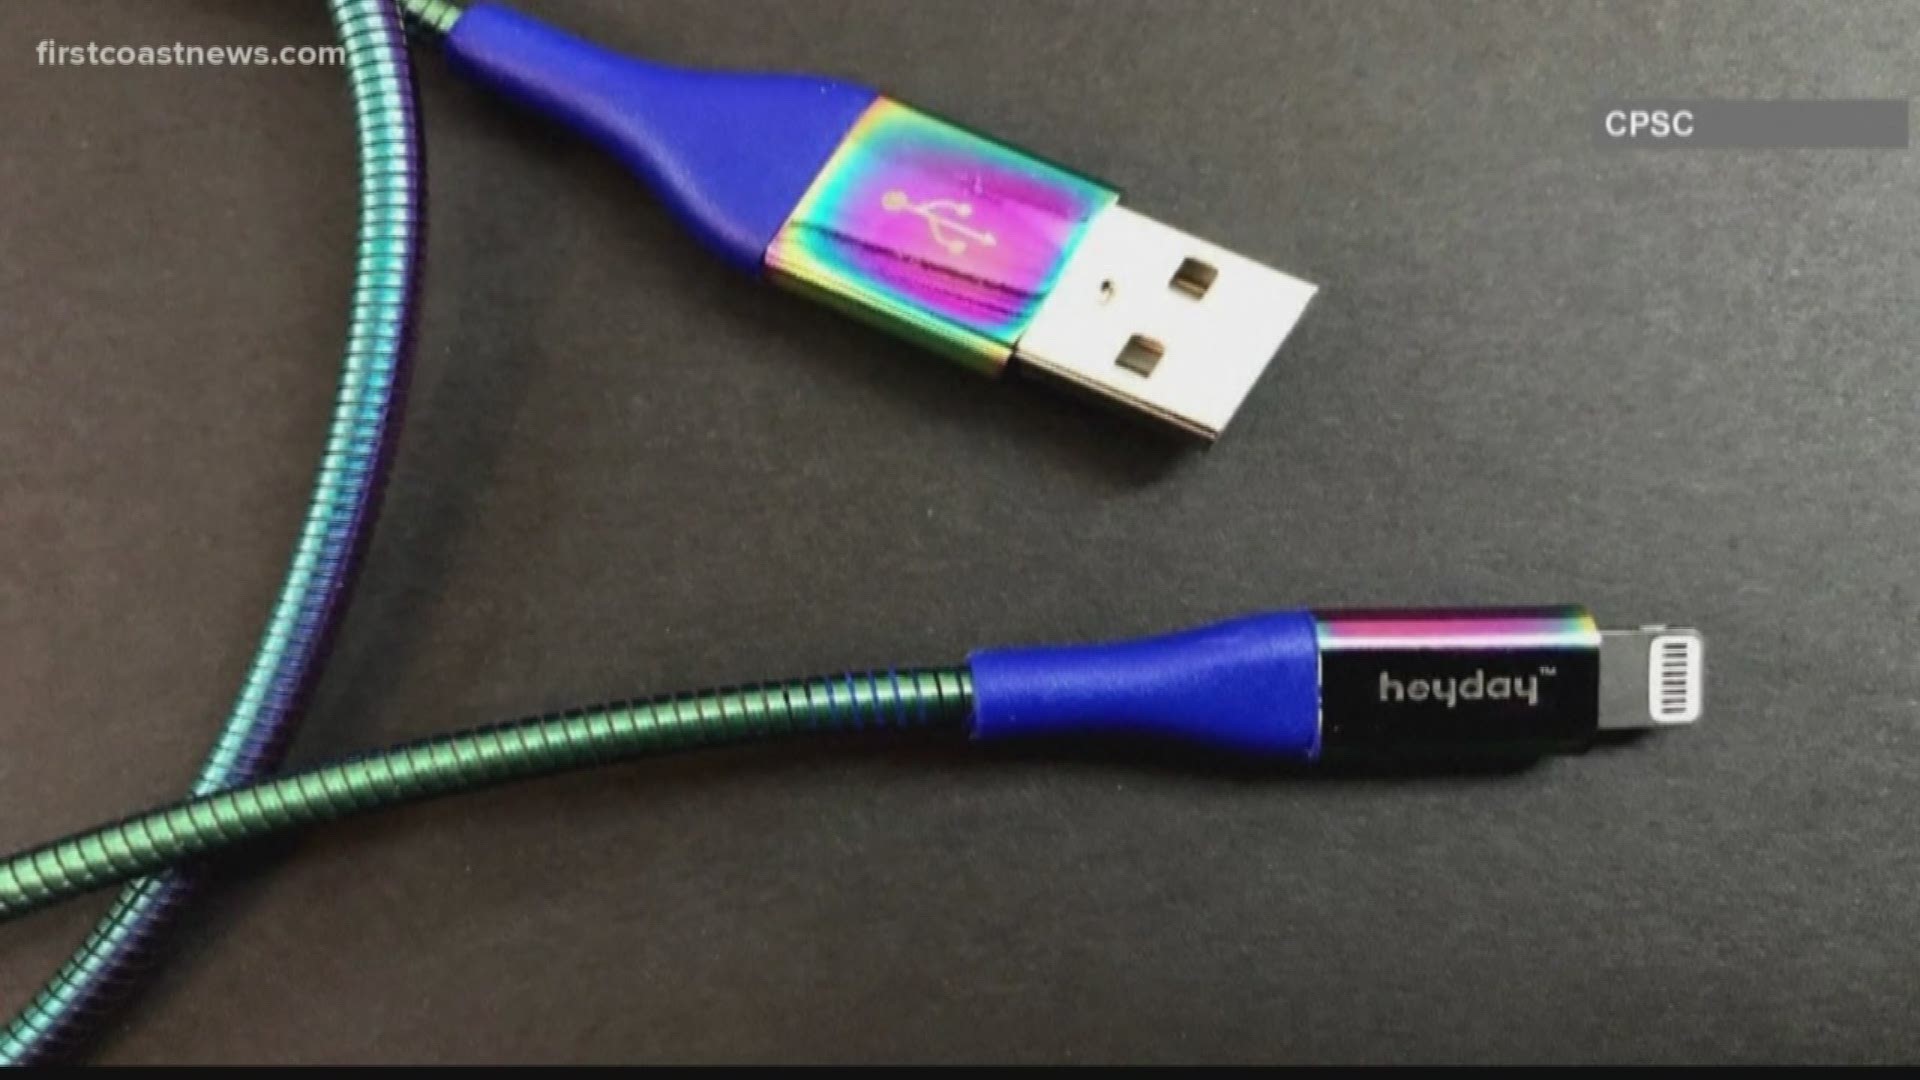 About 90,000 USB charging cables sold by Target are being recalled.